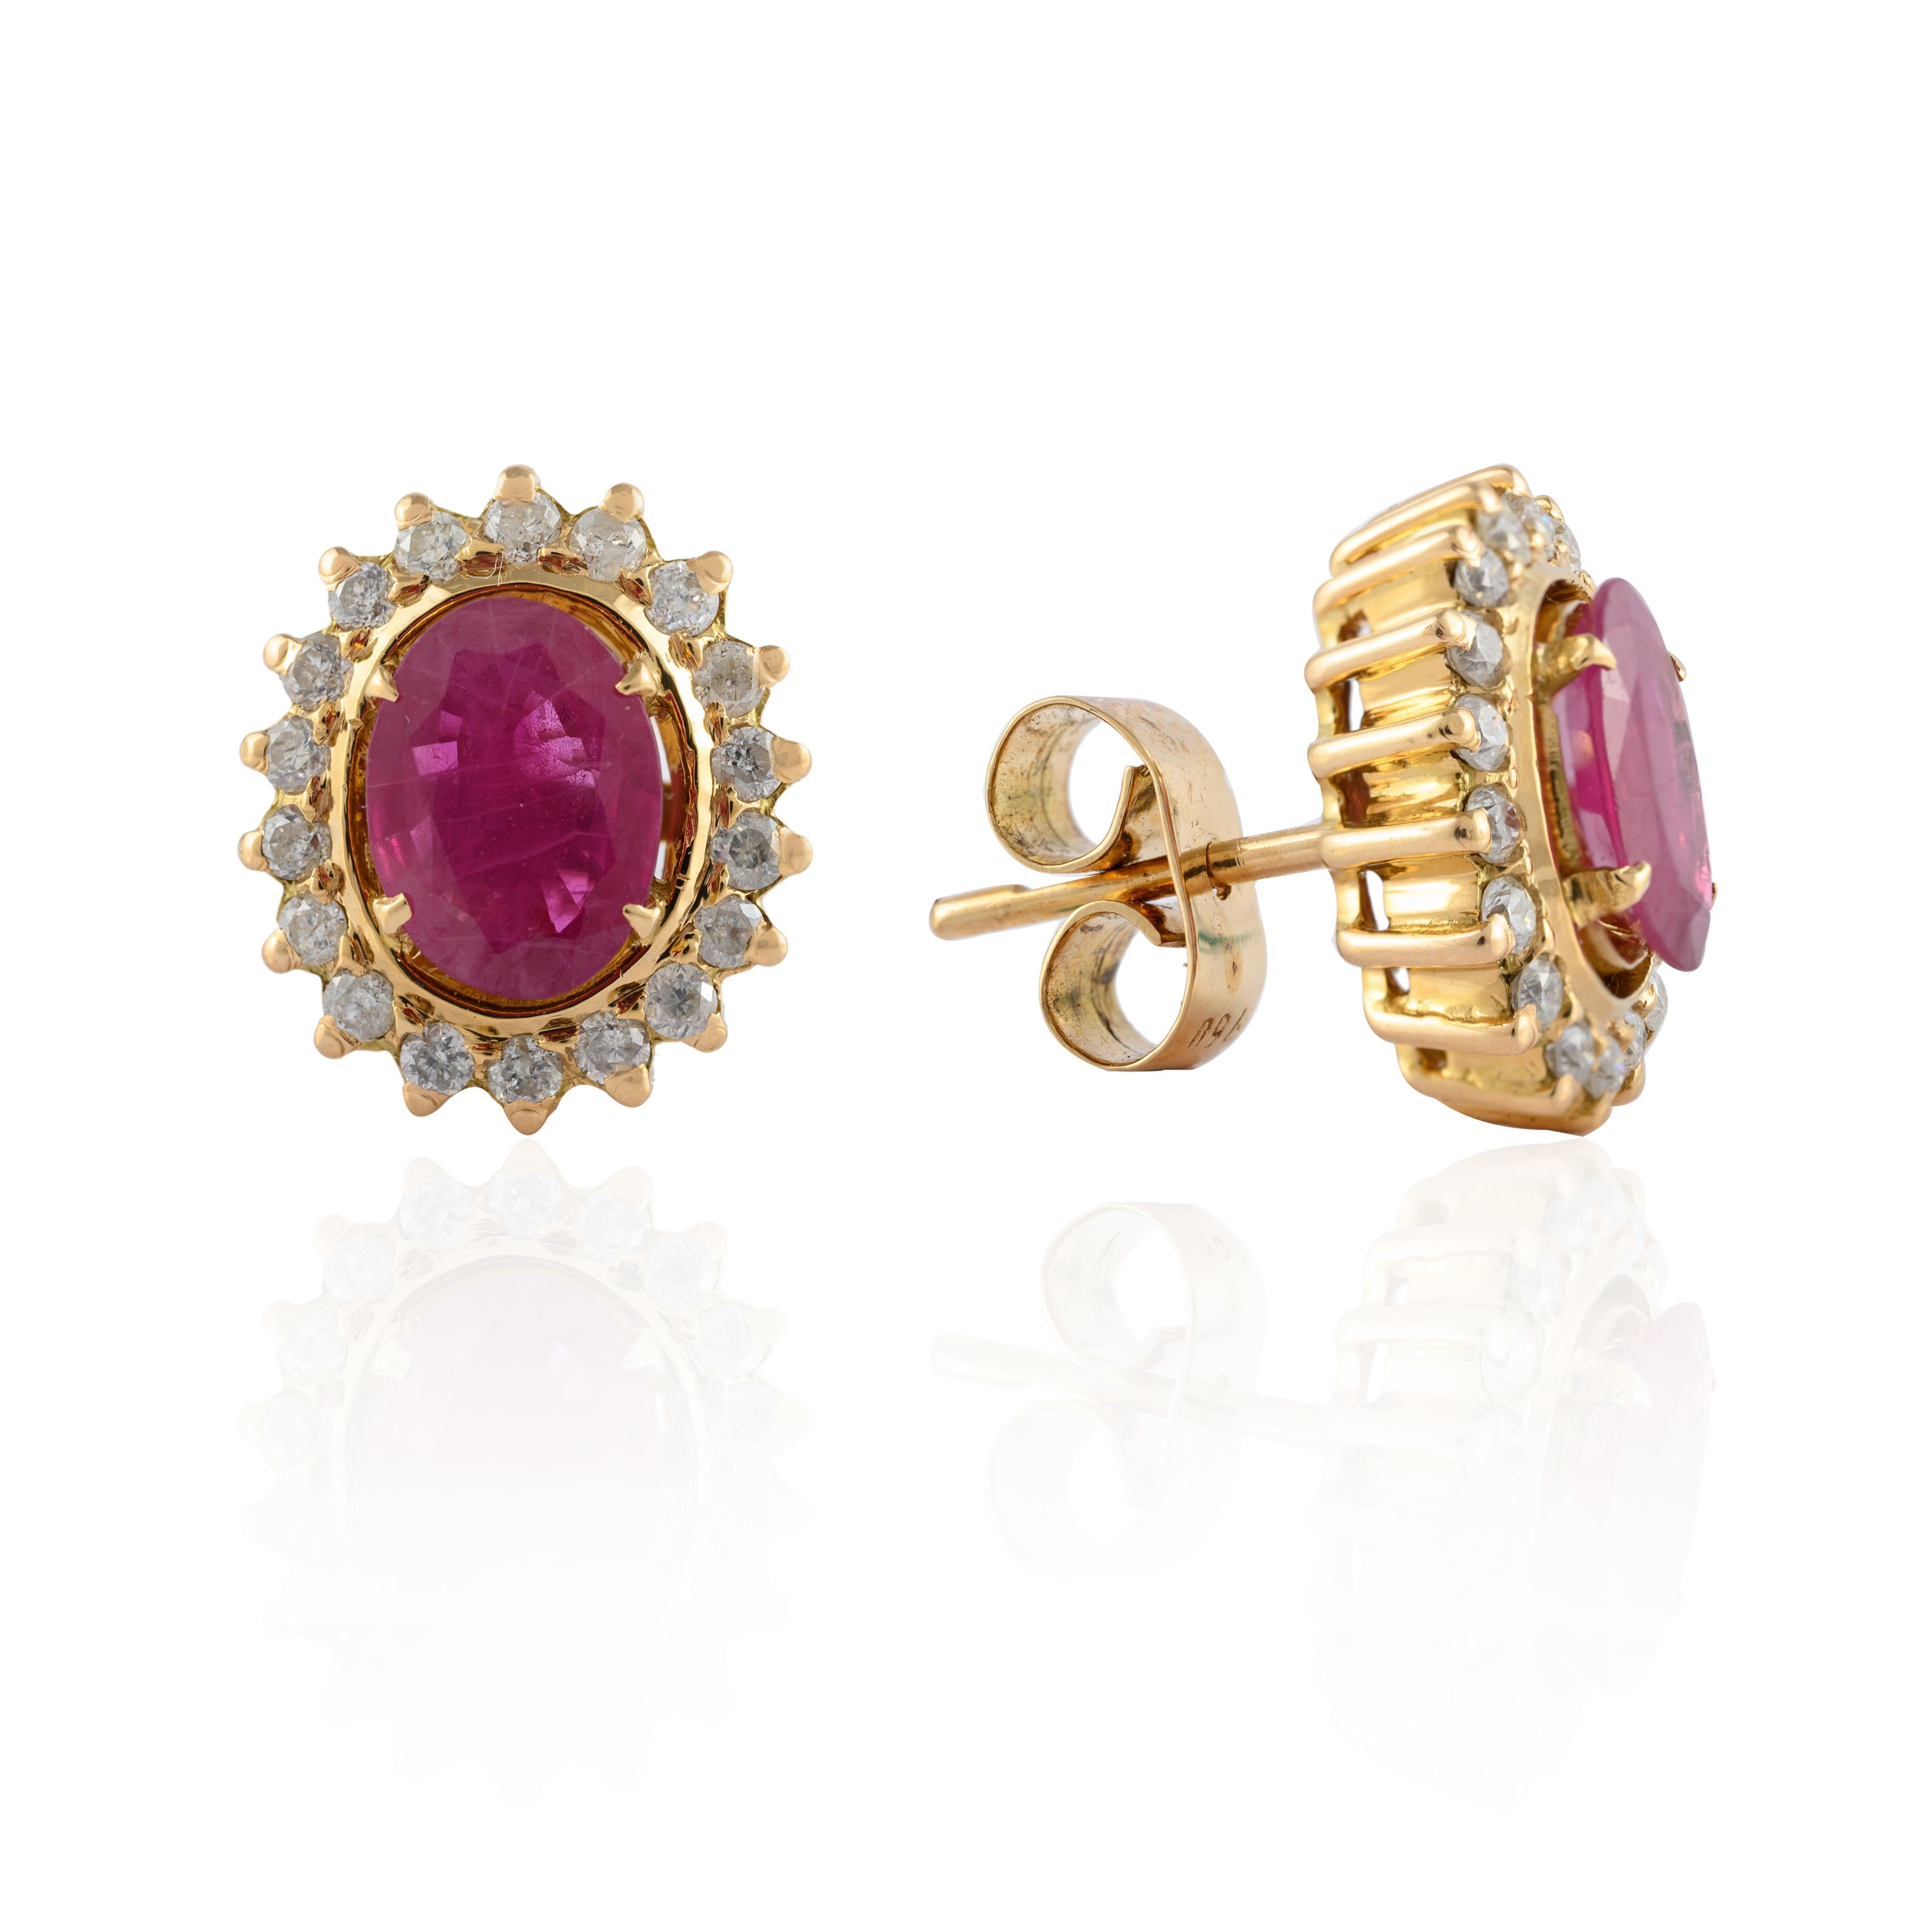 Natural Halo Diamond and Ruby Pushback Stud Earrings in 14K Gold. Embrace your look with these stunning pair of earrings suitable for any occasion to complete your outfit.
Ruby gemstone improves mental strength.
Featuring 3.25 carats of oval ruby